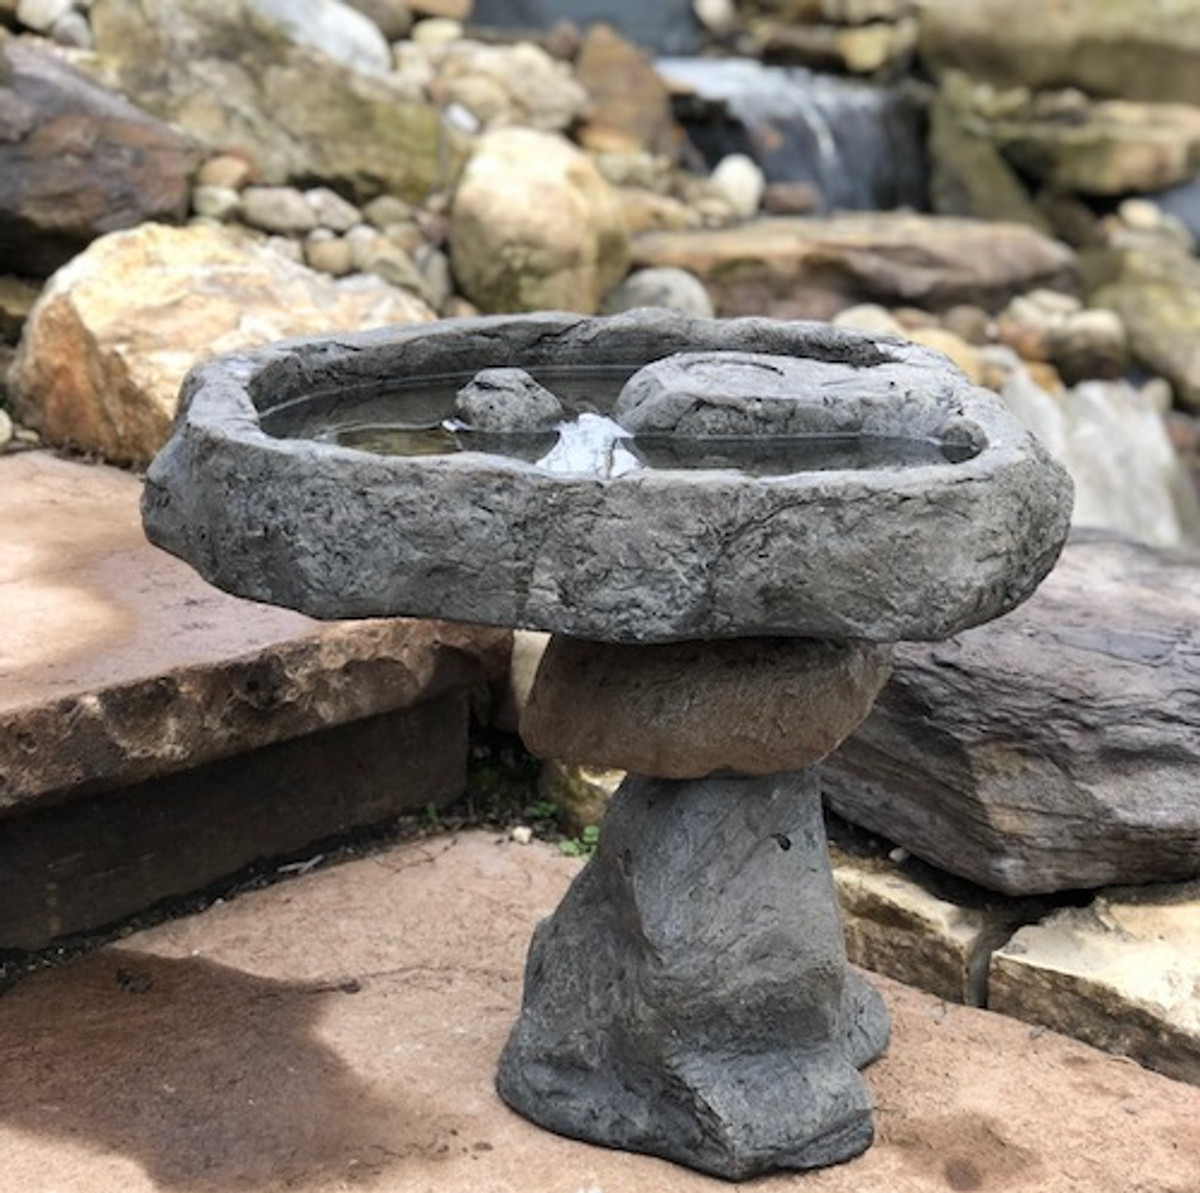 Outdoor garden organic rock birdbath from Athena Garden makes wonderful Mother's Day and Father's Day gifts. This concrete balancing rock birdbath is a unique hand sculpted design that has high quality and made in the U.S.A, decorative concrete balancing rock garden birdbath, outdoor organic balancing stone bird bath, gifts for all occasions. Two Piece Balanced Stone Bird Bath, concrete bird bath, stone bird bath, cast stone bird bath, balancing rock sculpture